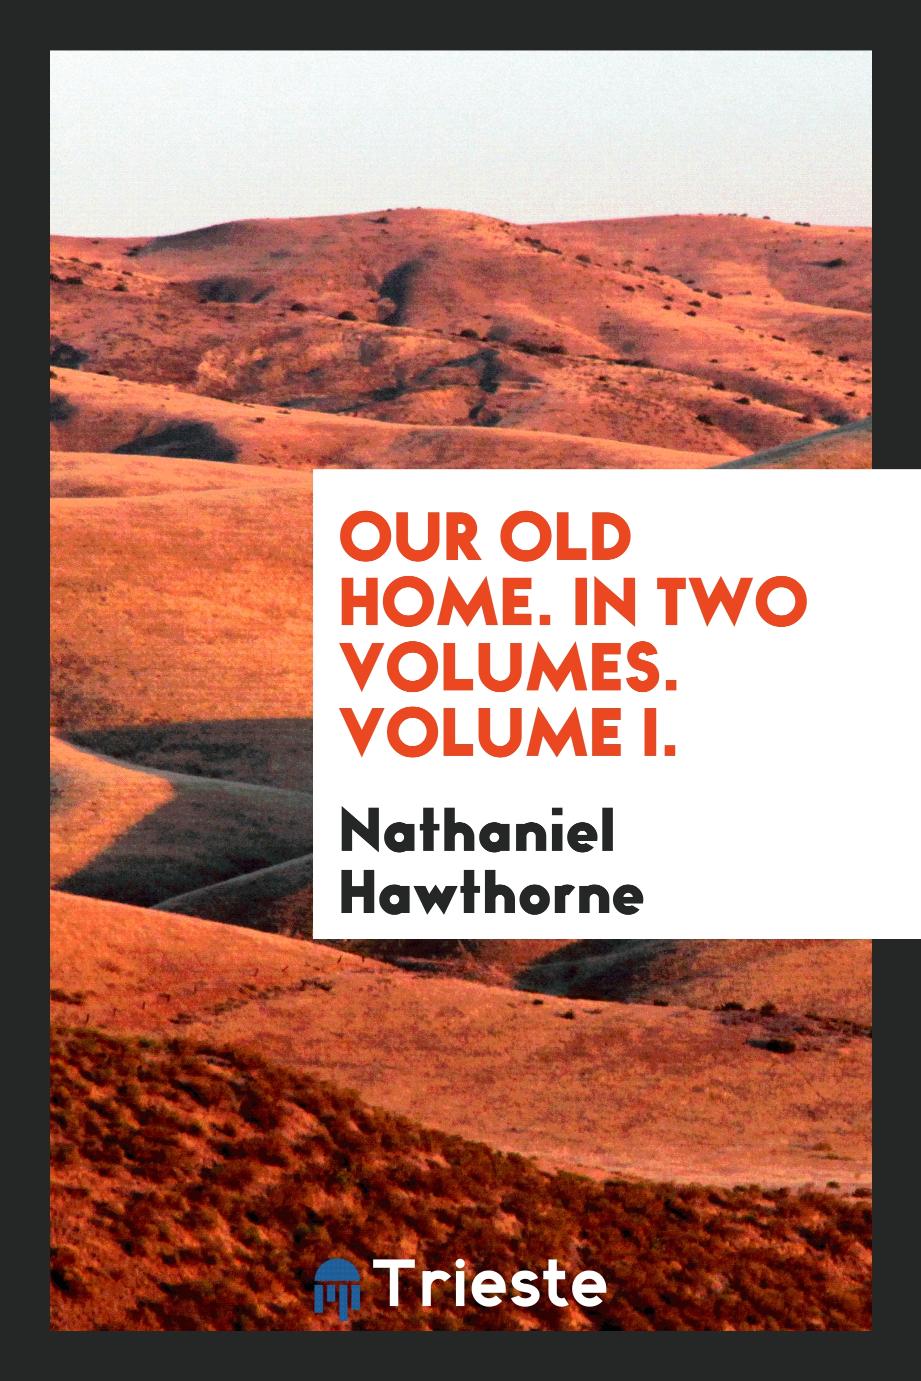 Our old home. In two volumes. Volume I.